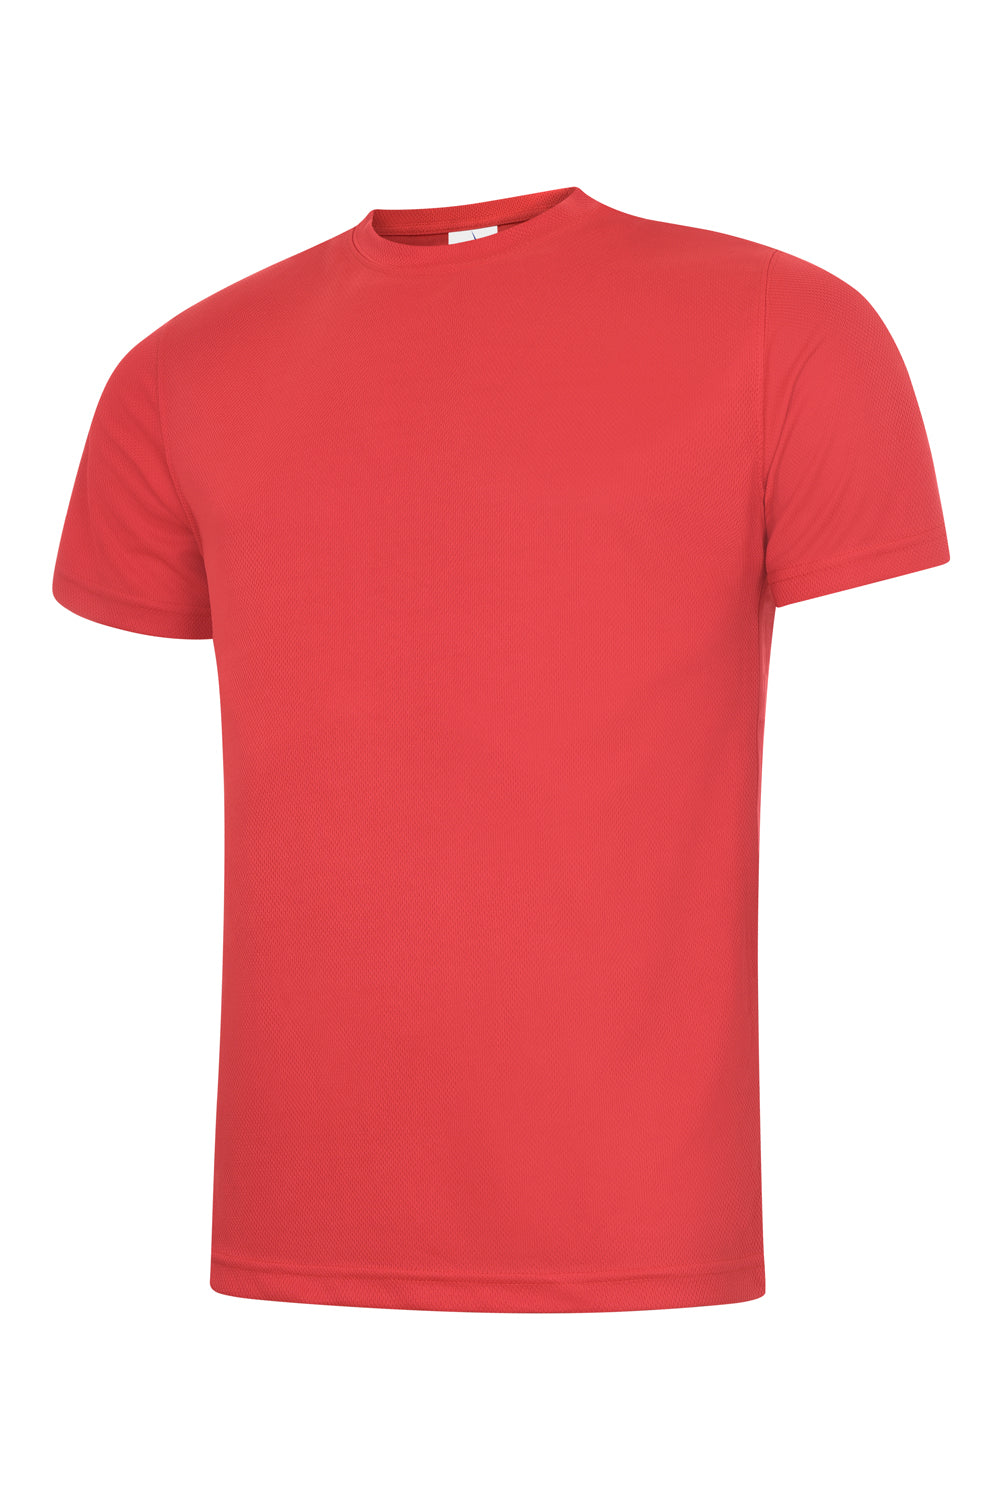 mens_ultra_cool_t_shirt_red